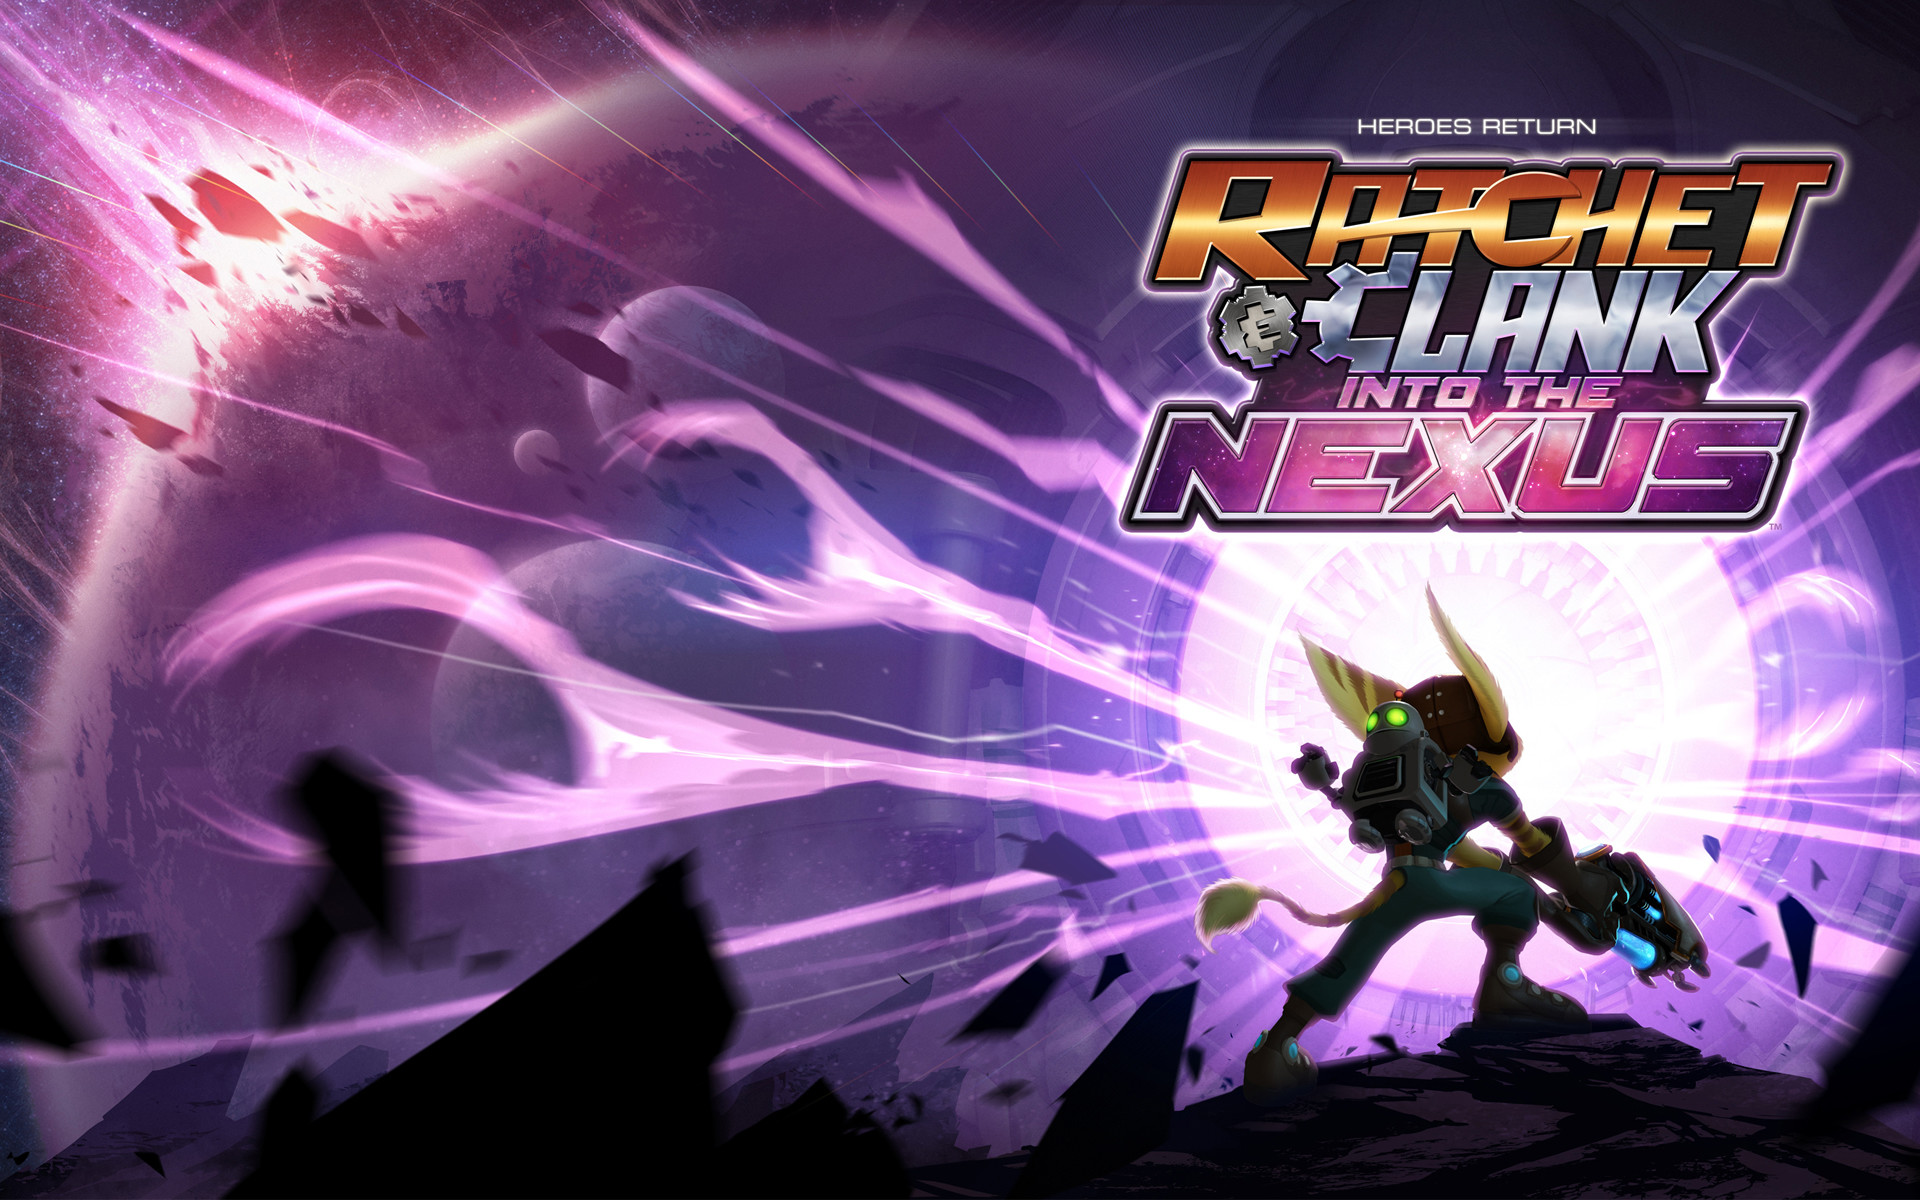 1920x1200 Ratchet & Clank: Into The Nexus HD Wallpaper | Background Image |   | ID:976180 - Wallpaper Abyss